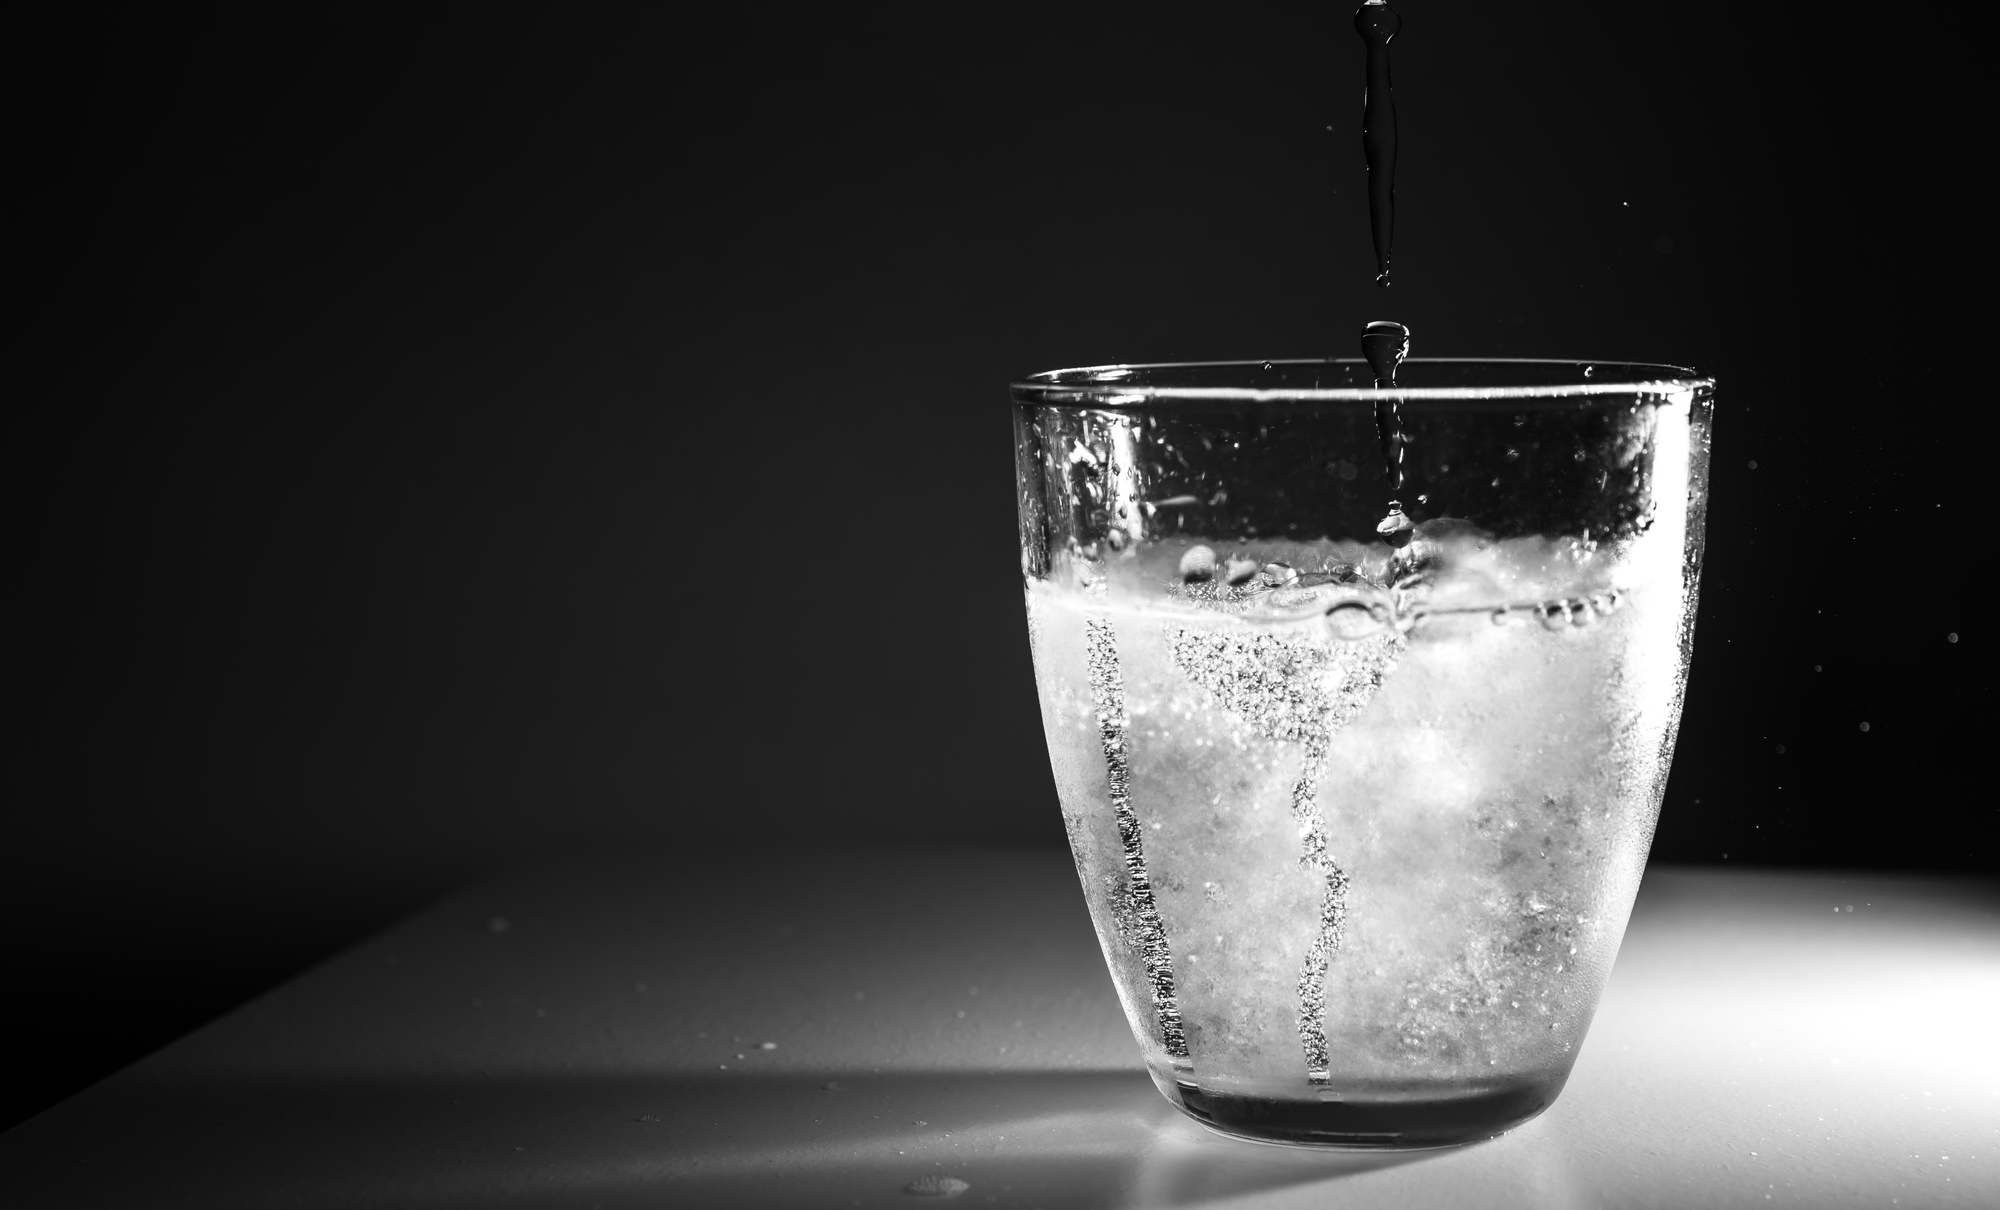 vital reaction molecular hydrogen tablets dissolving in a glass of water